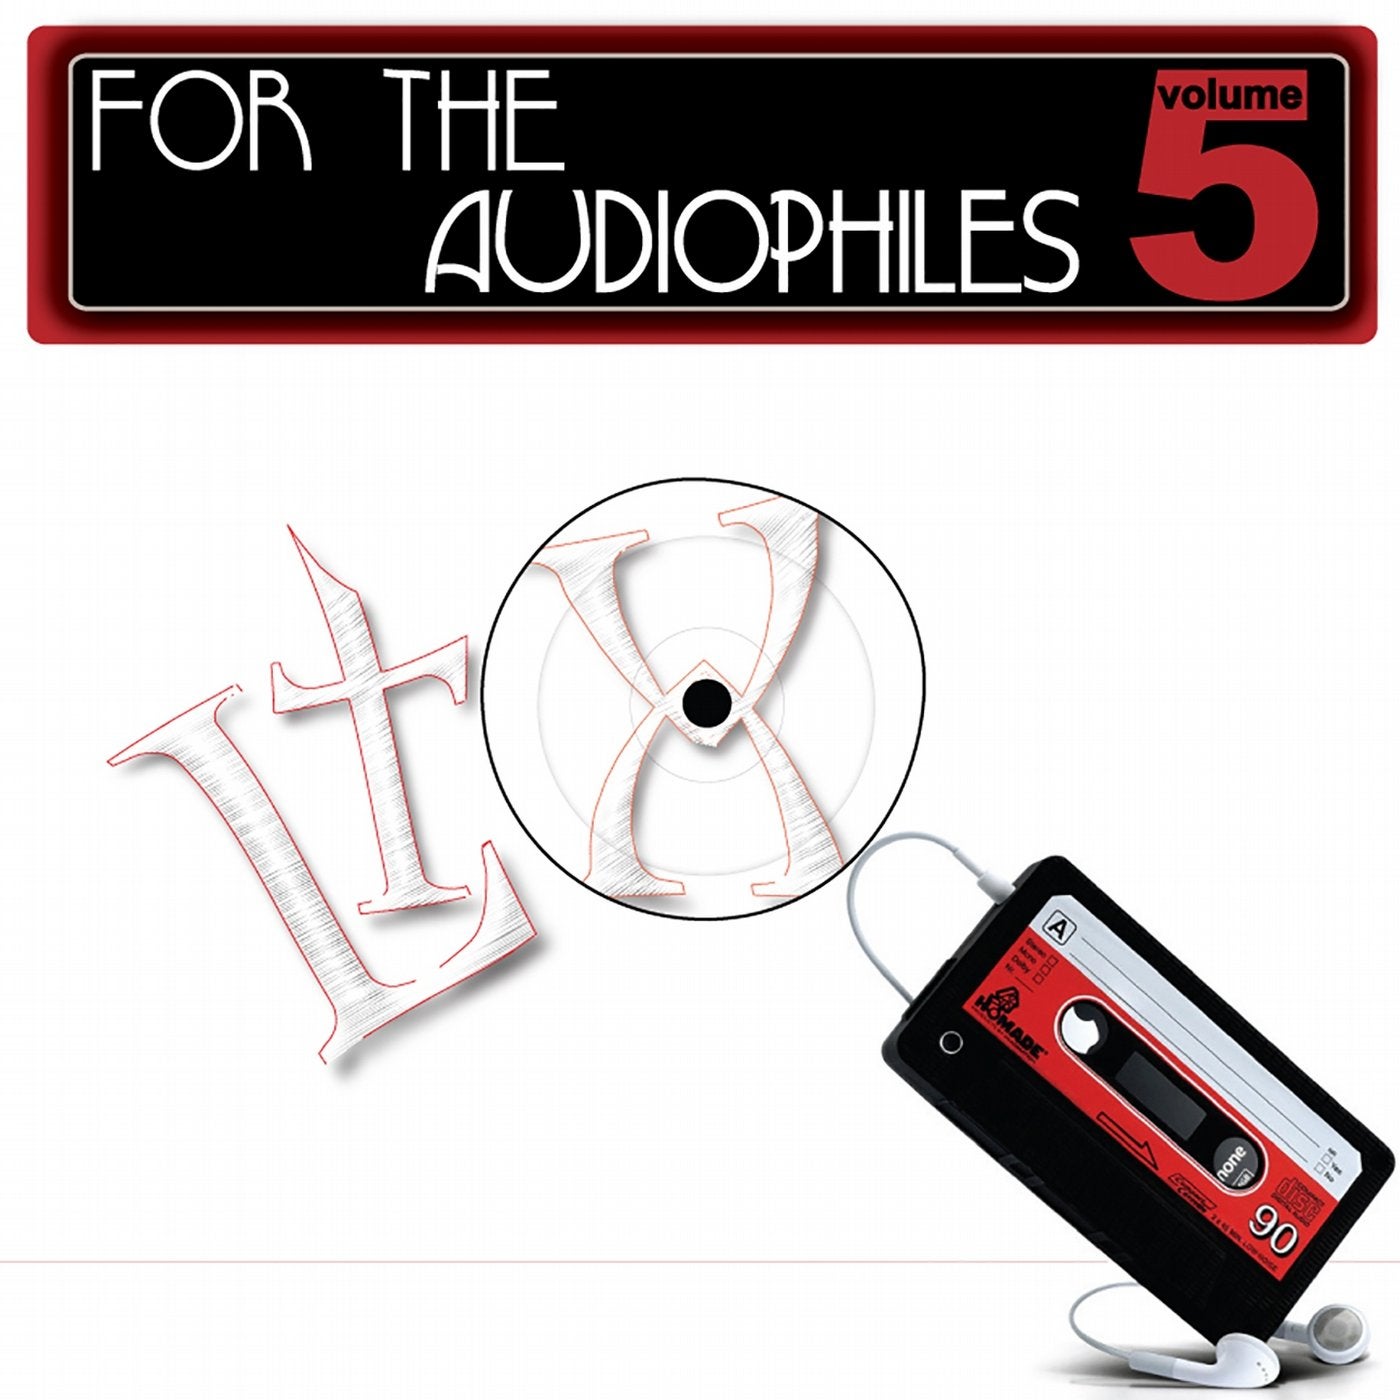 For the Audiophiles (Volume 5)